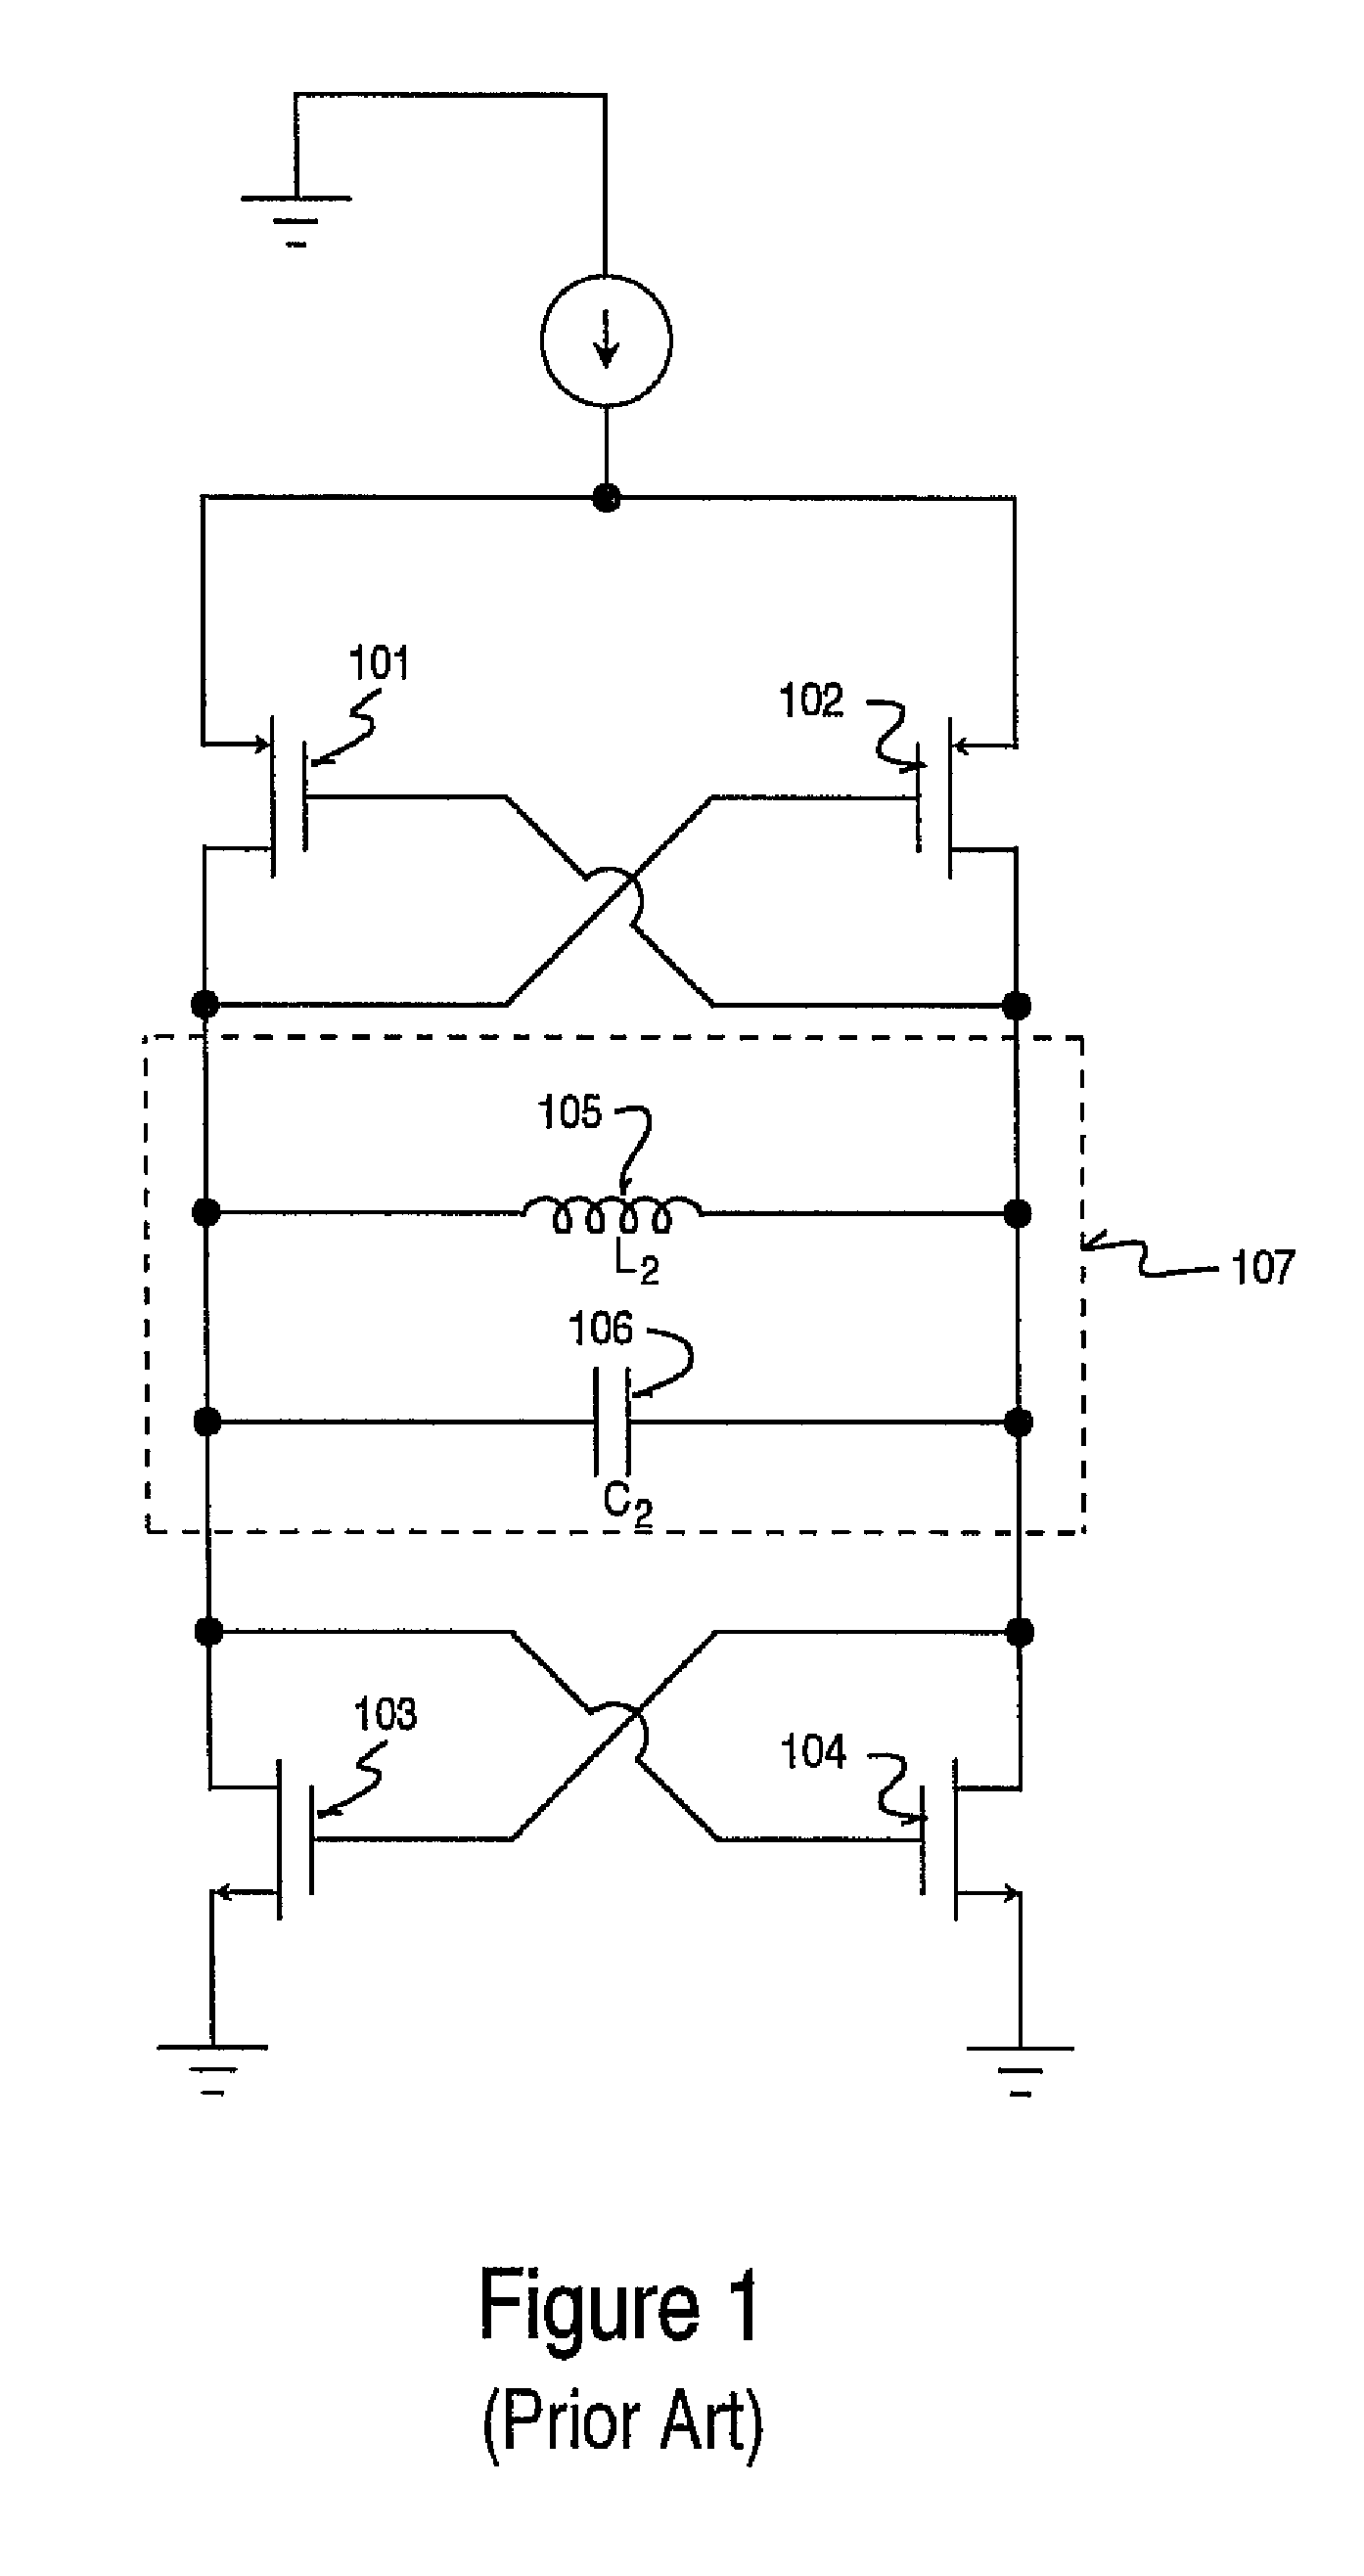 Voltage controlled oscillator having reduced phase noise